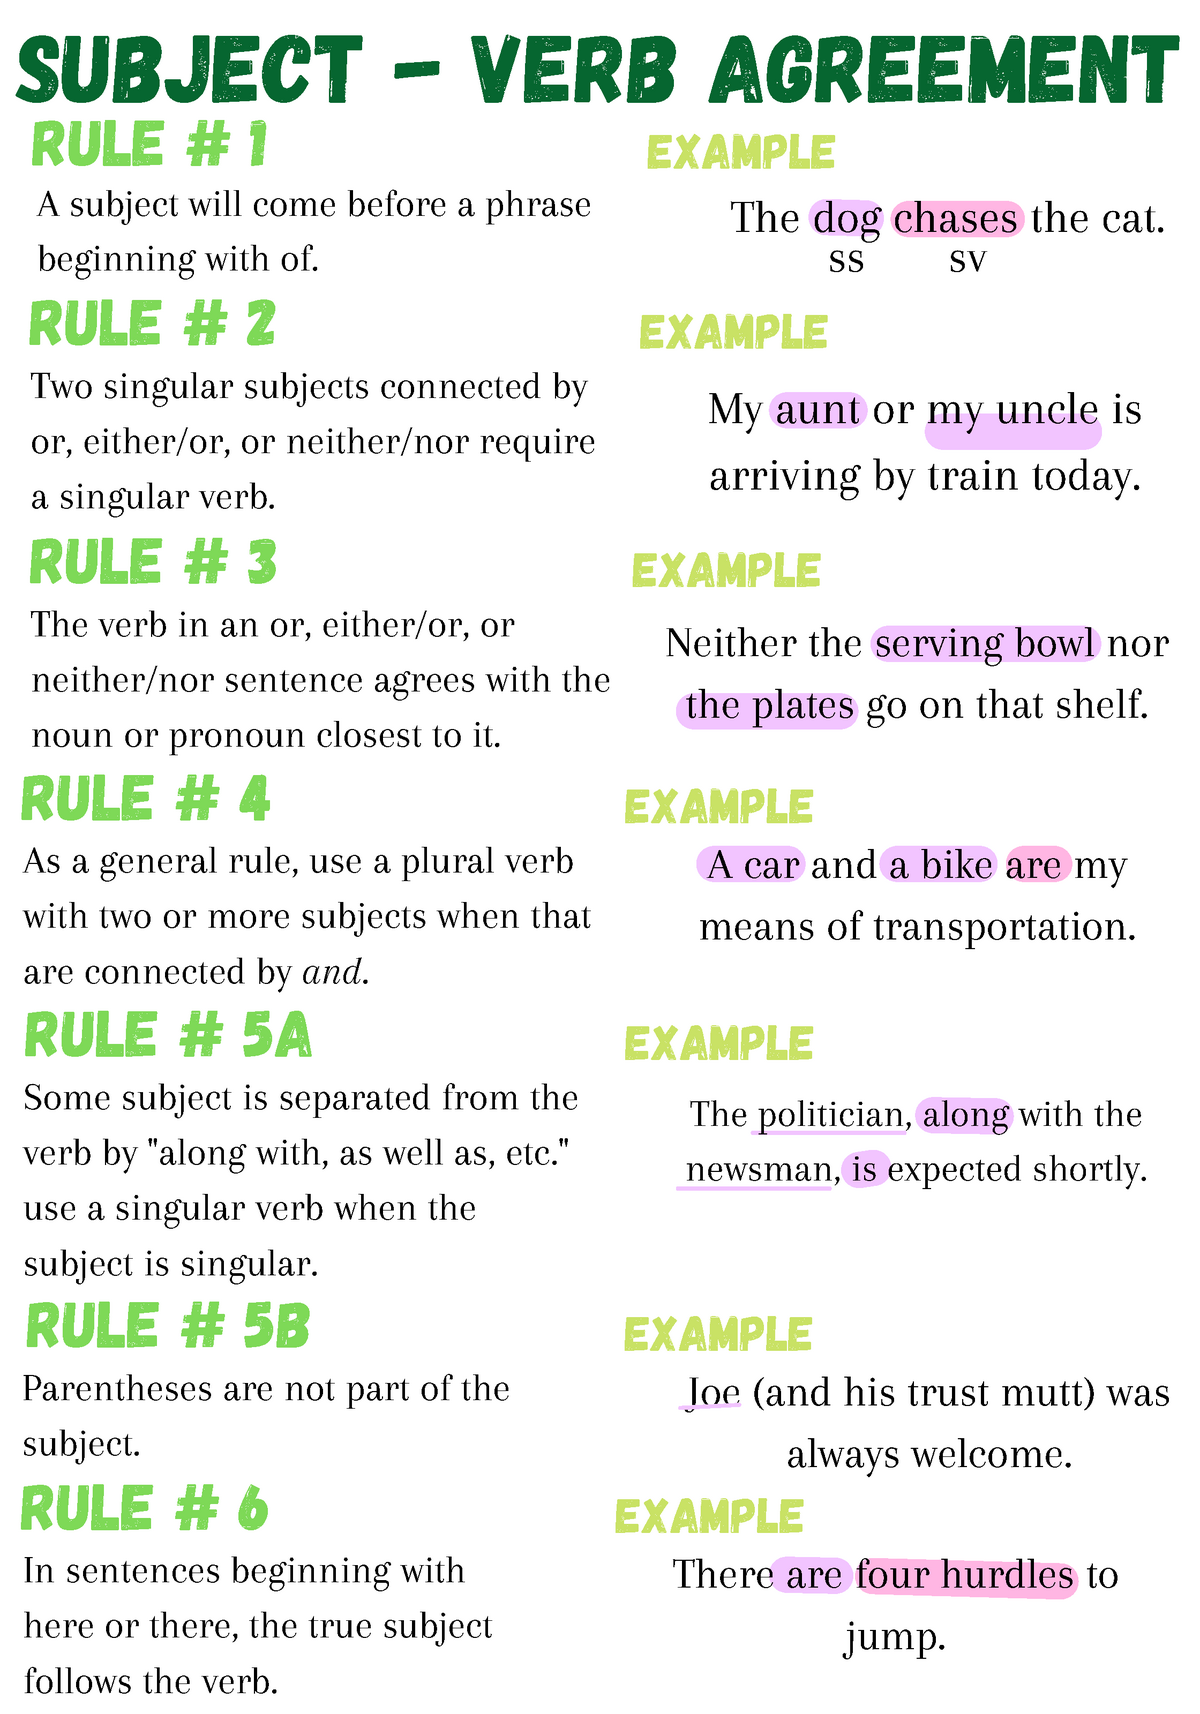 sv-agreement-and-types-of-sentences-subject-verb-agreement-rule-1